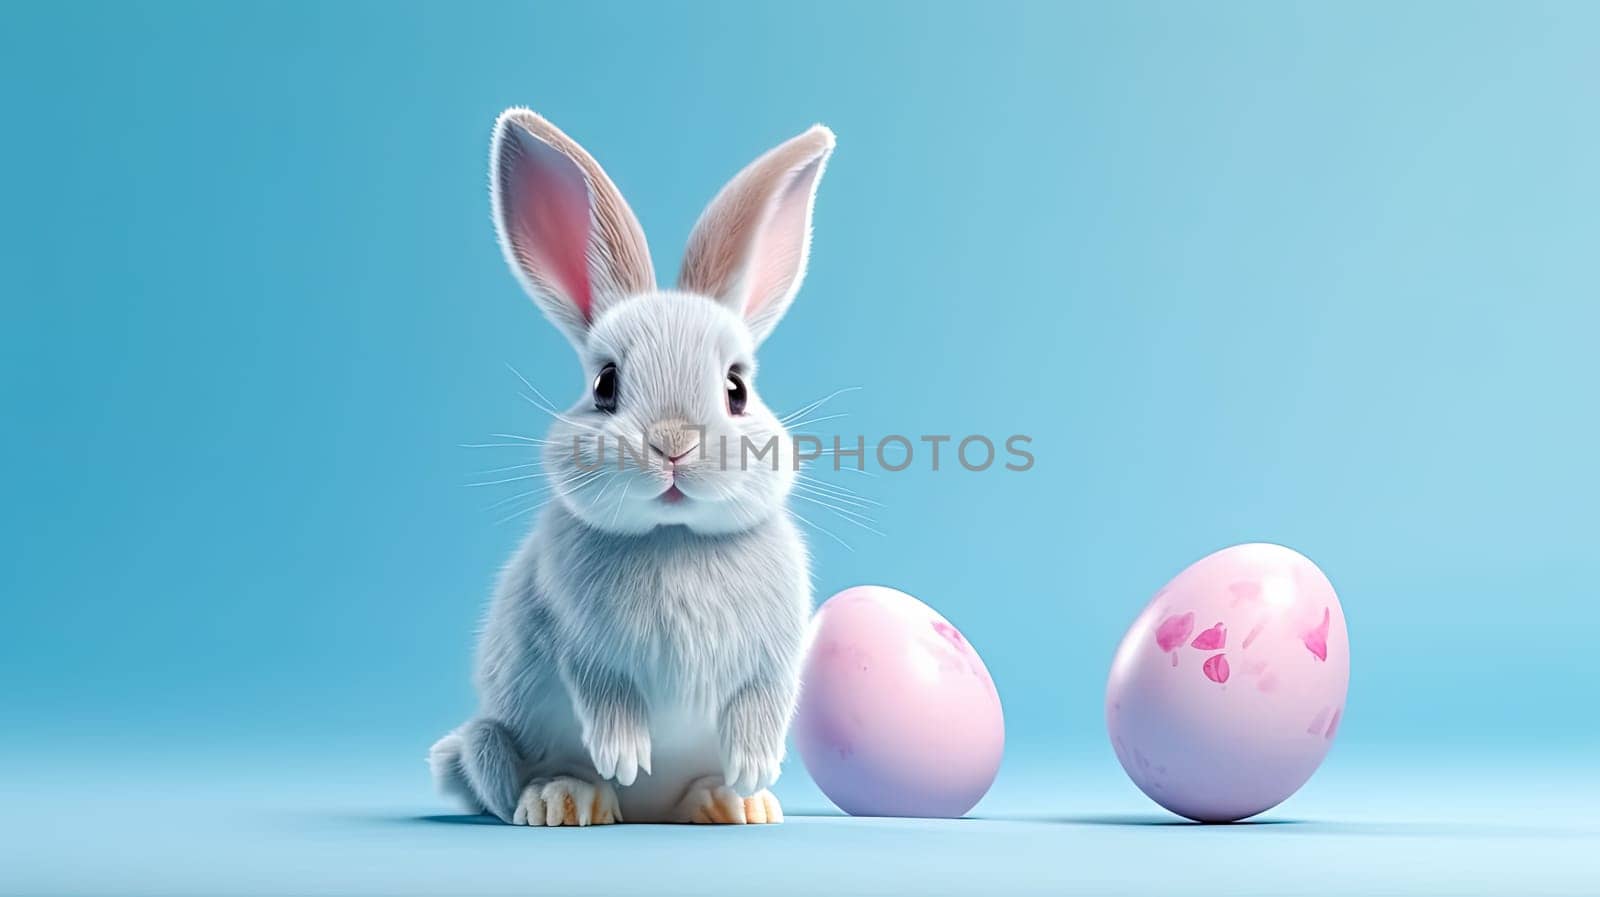 The Easter bunny is happy, sitting on colored paper by Alla_Morozova93